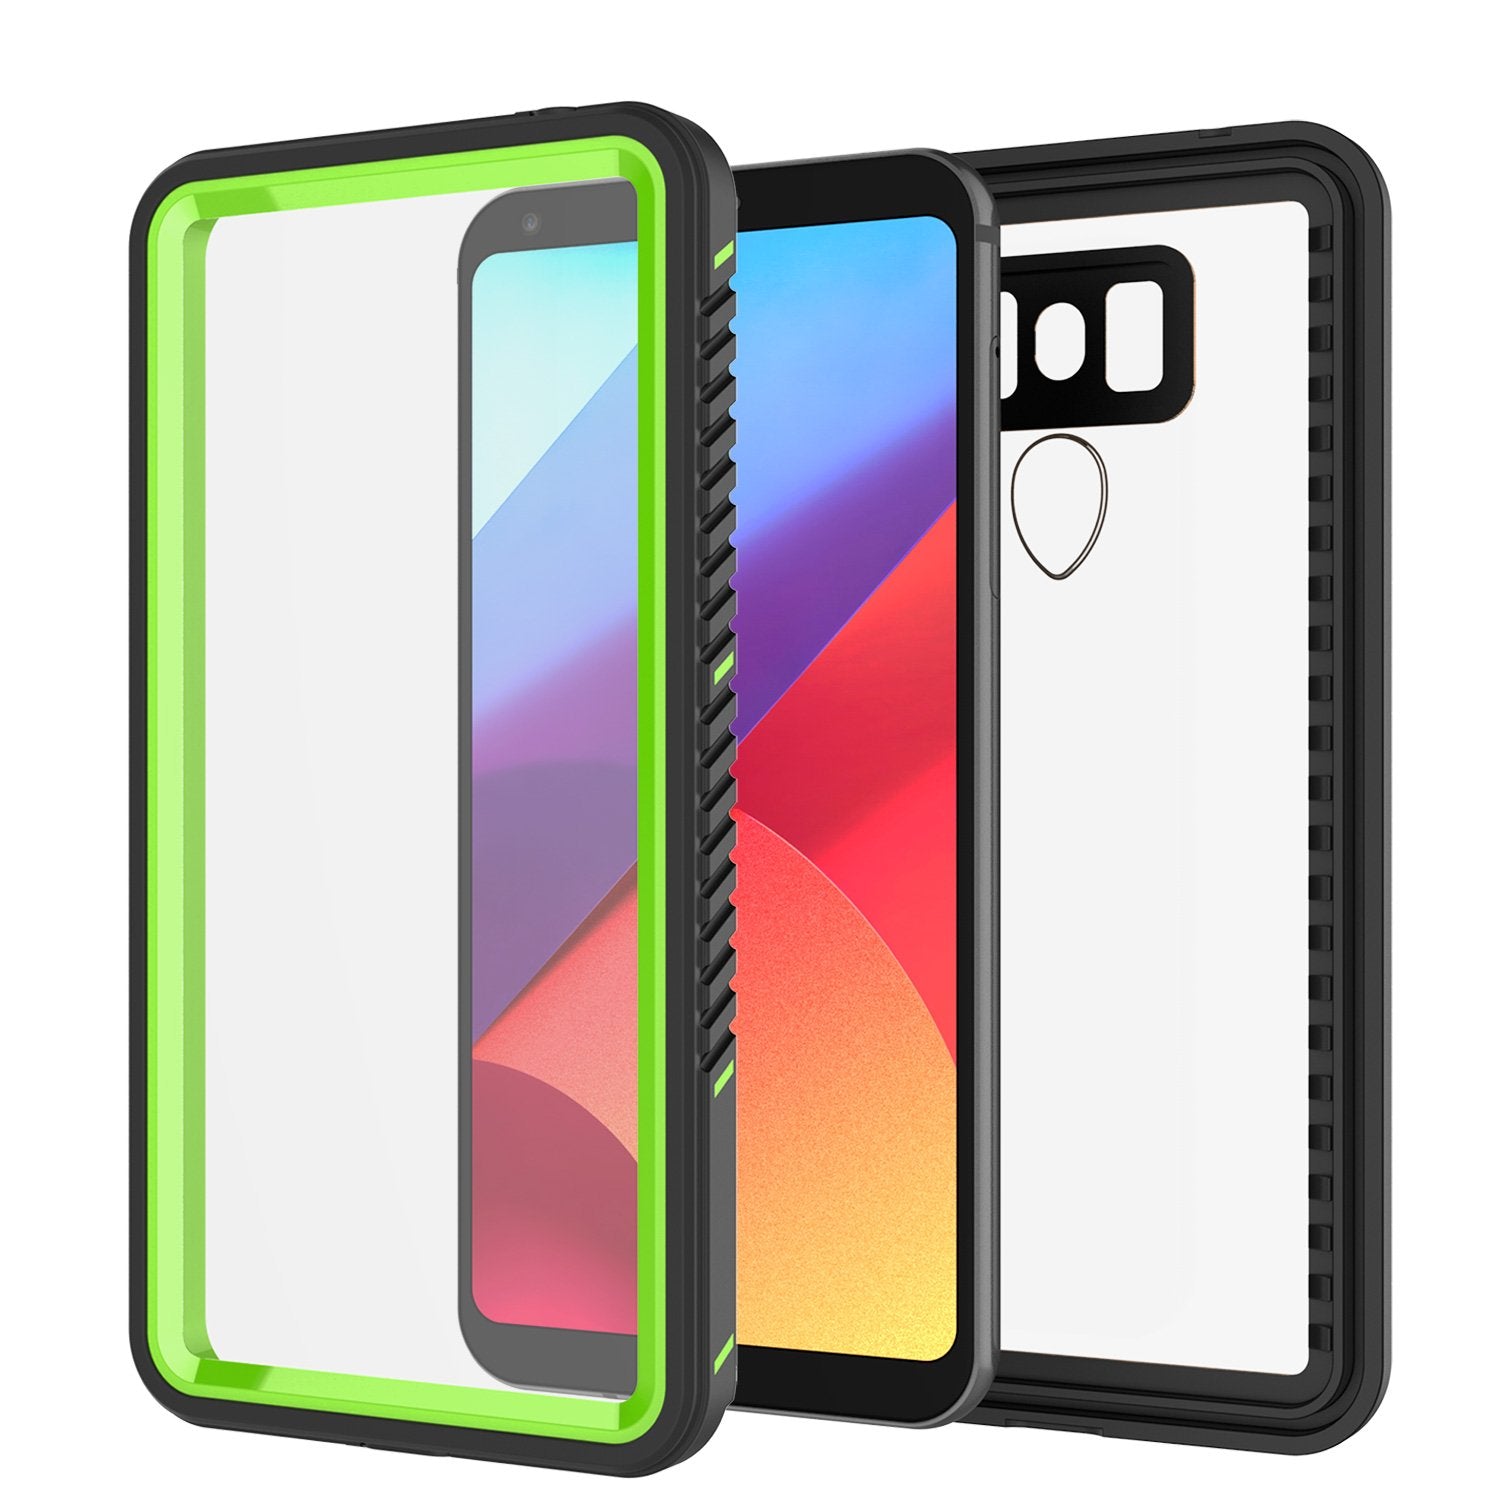 LG G6 Waterproof Case, Punkcase [Extreme Series] [Slim Fit] [IP68 Certified] [Shockproof] [Snowproof] [Dirproof] Armor Cover W/ Built In Screen Protector for LG G6 [GREEN] - PunkCase NZ